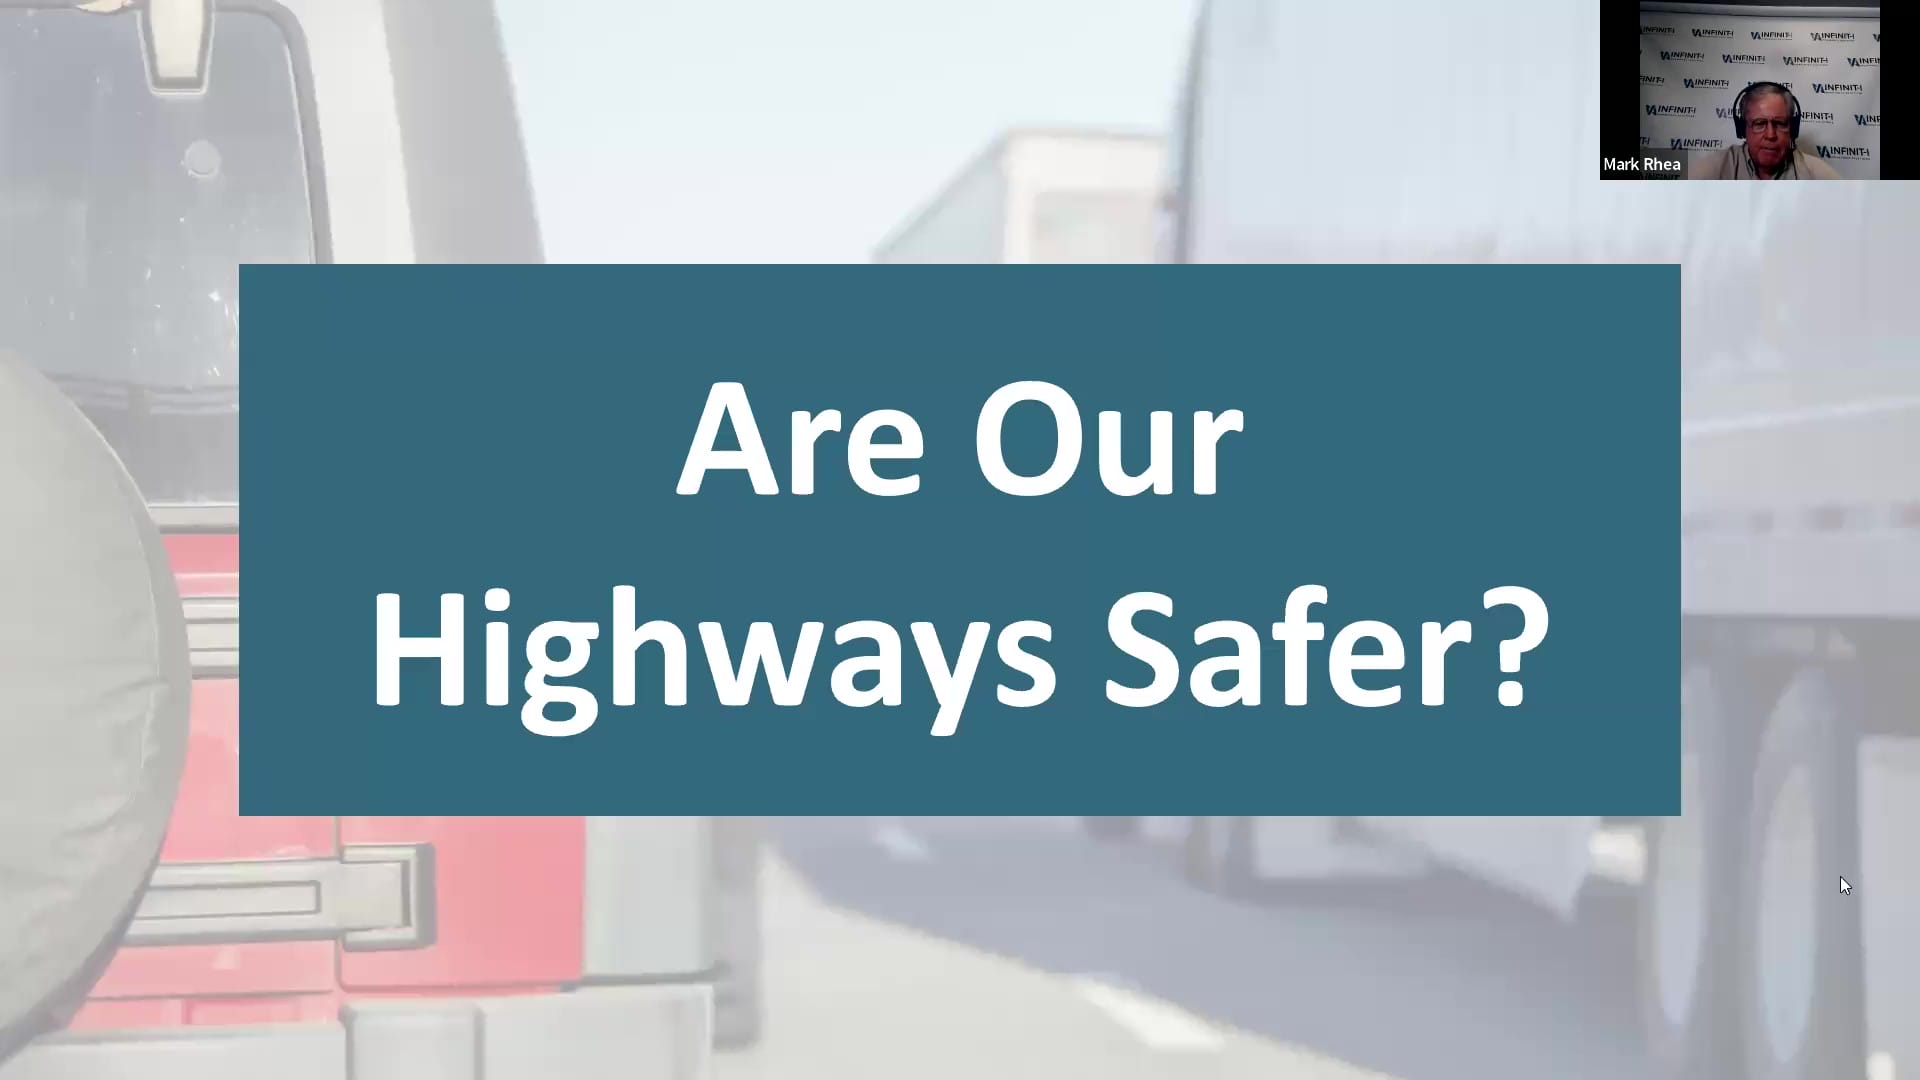 Are Highways Safer for Truckers